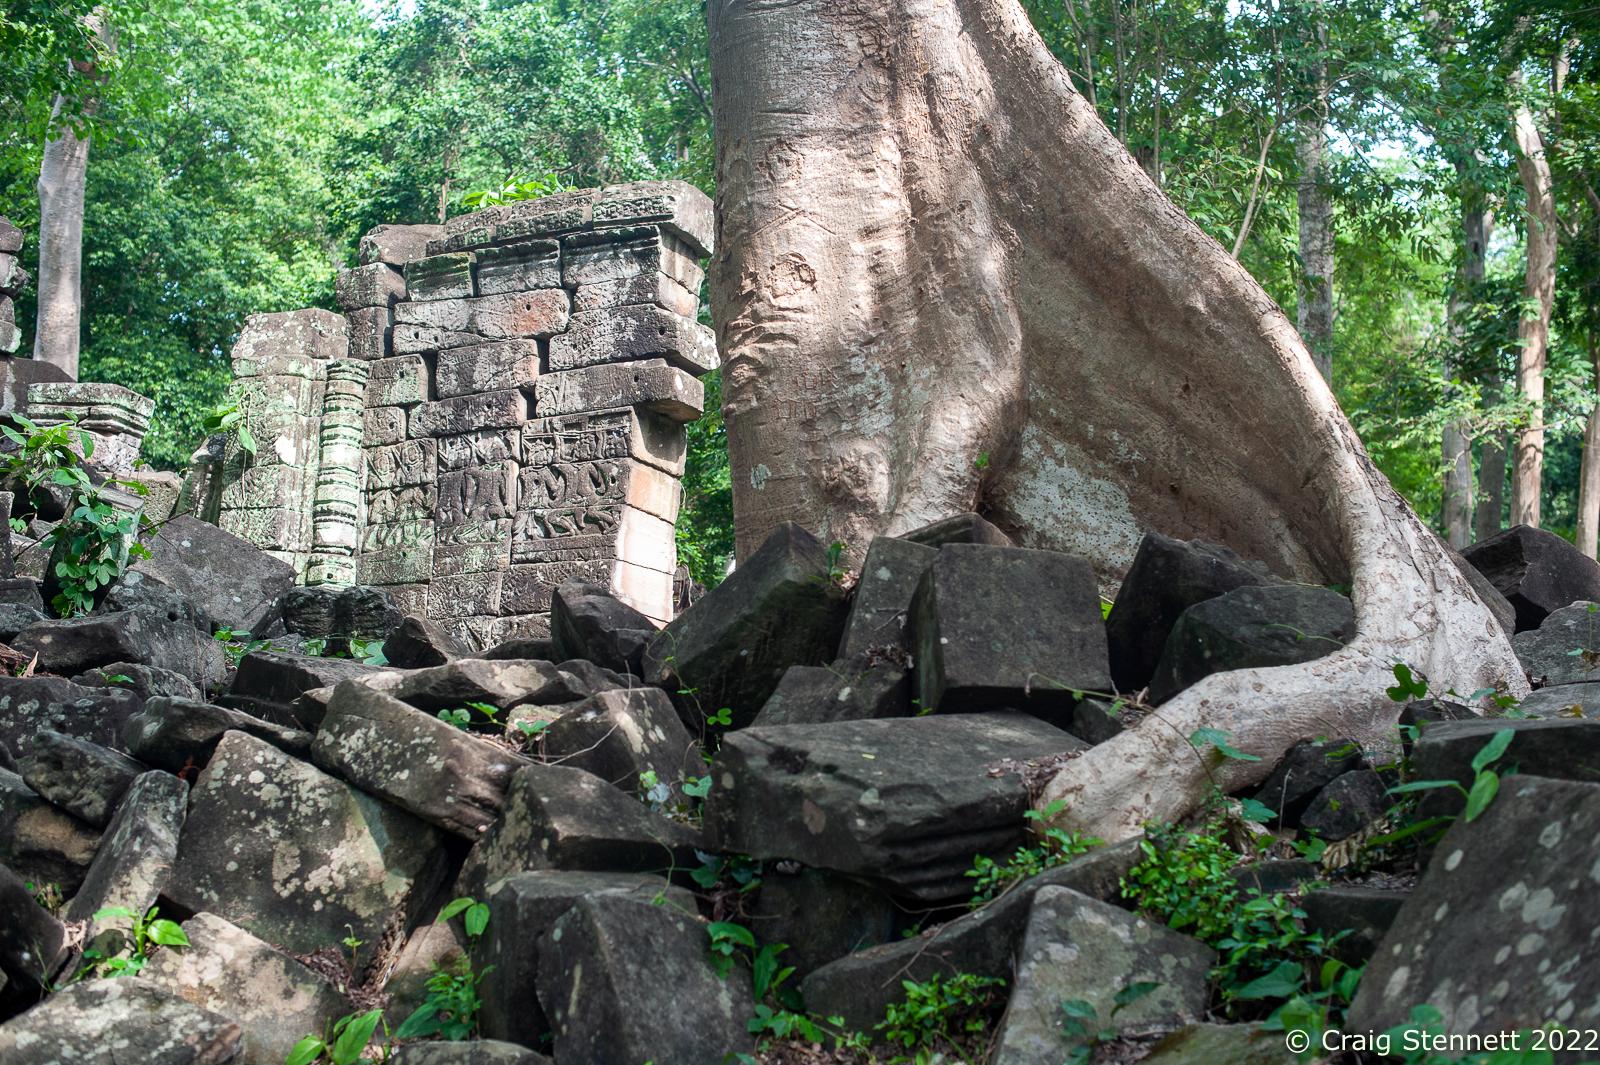 The Lost Temple, Banteay Chhmar.